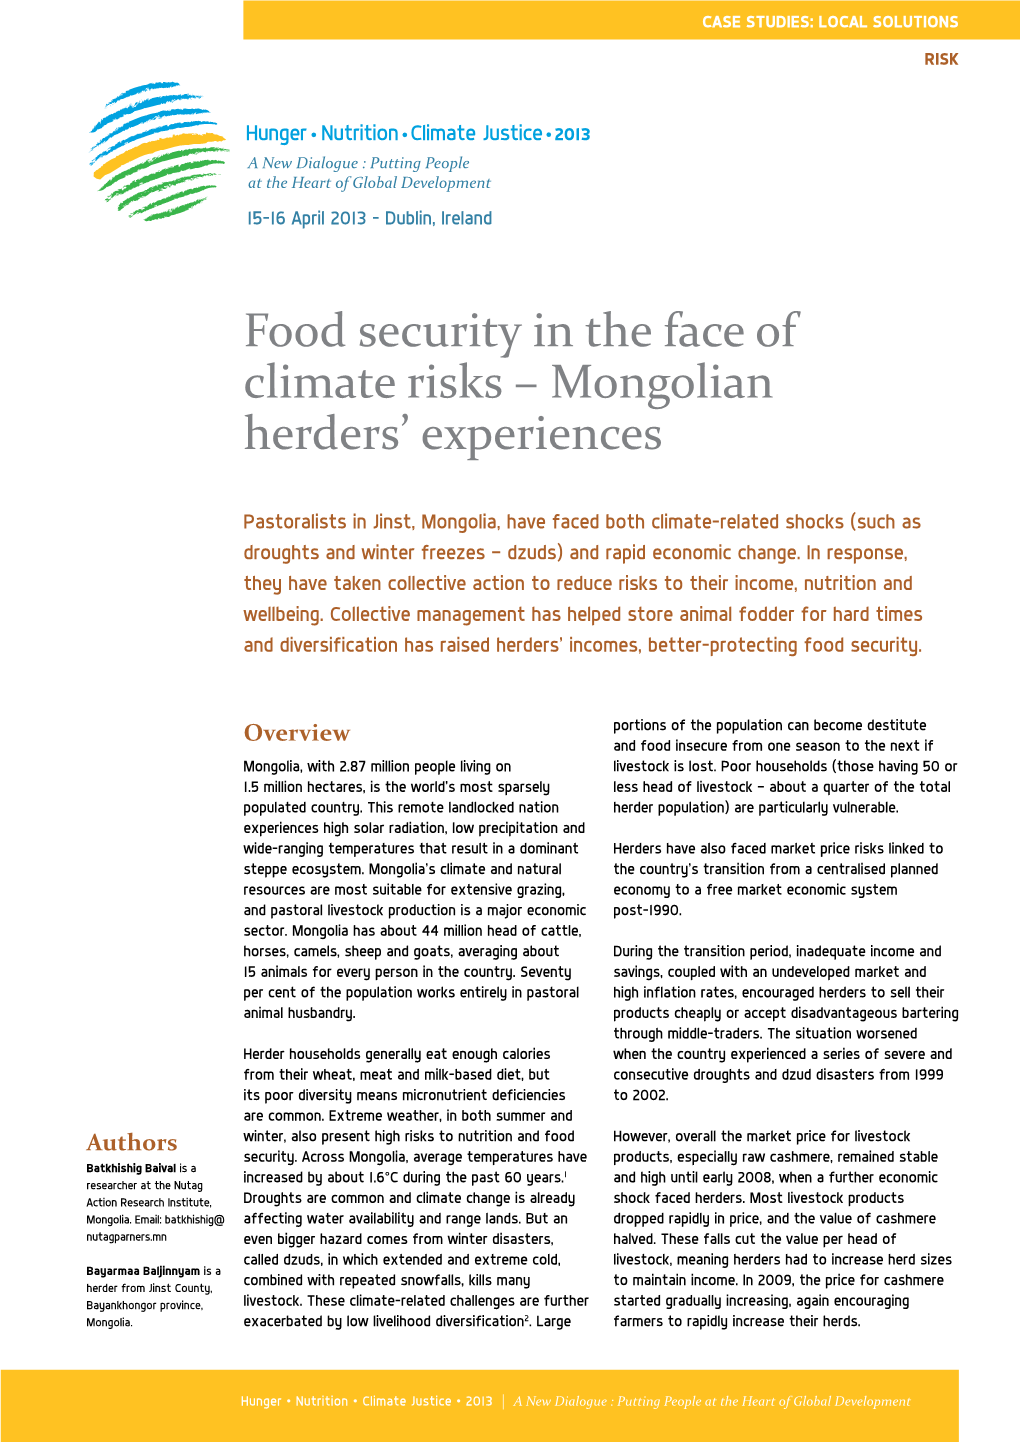 Food Security in the Face of Climate Risks – Mongolian Herders' Experiences